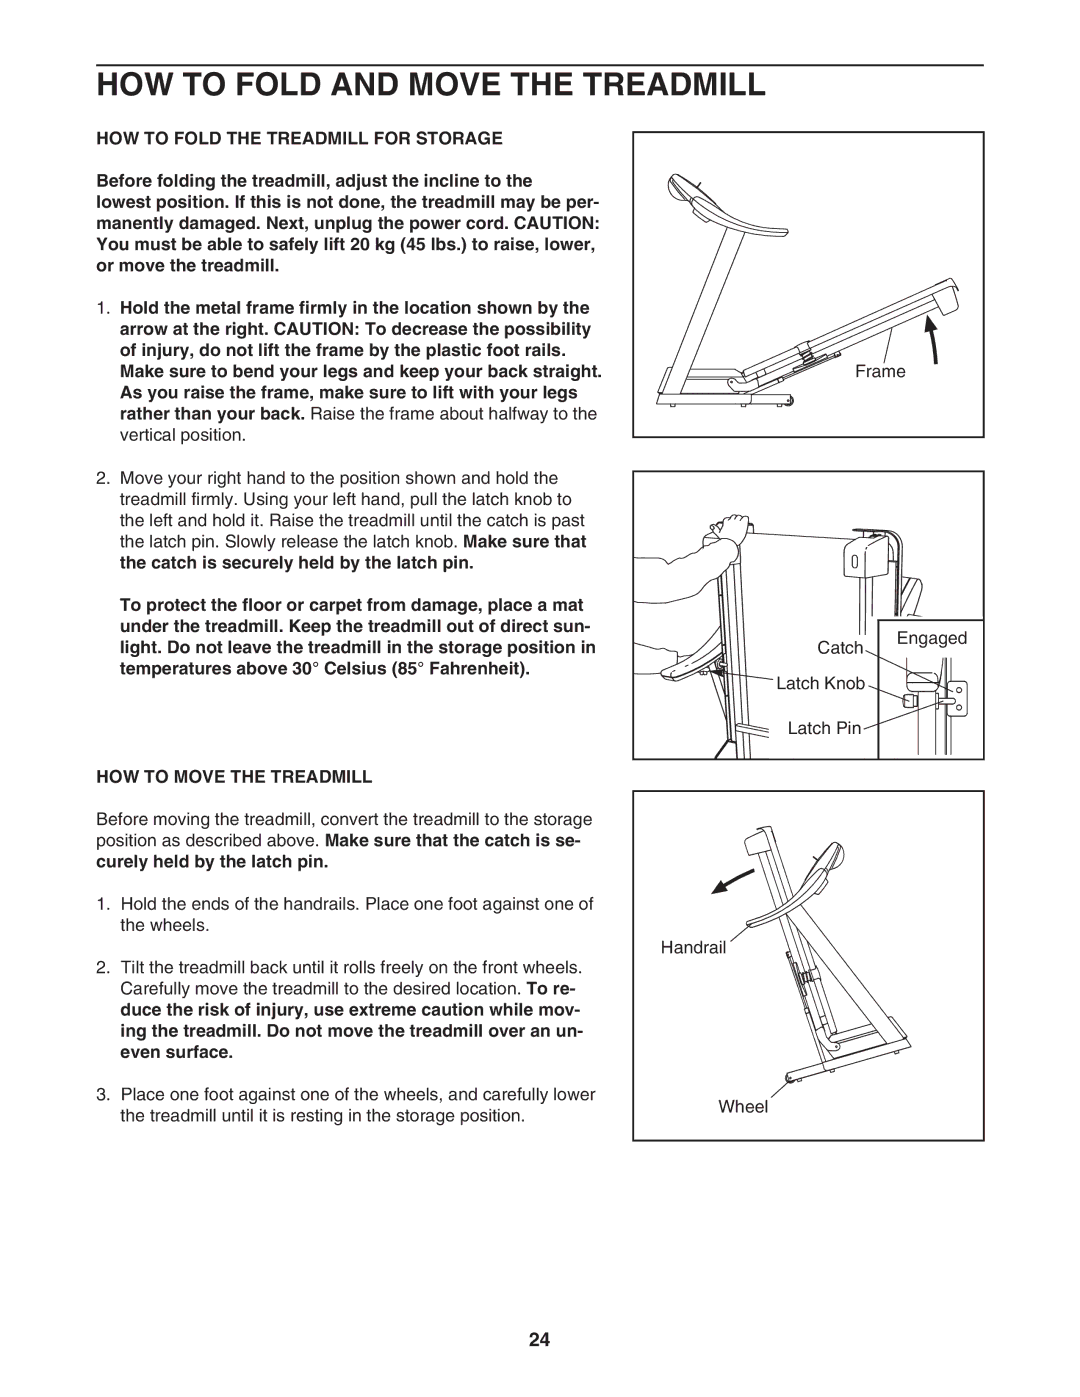 Inter-Tel PATL41106.0 HOW to Fold and Move the Treadmill, HOW to Fold the Treadmill for Storage, HOW to Move the Treadmill 